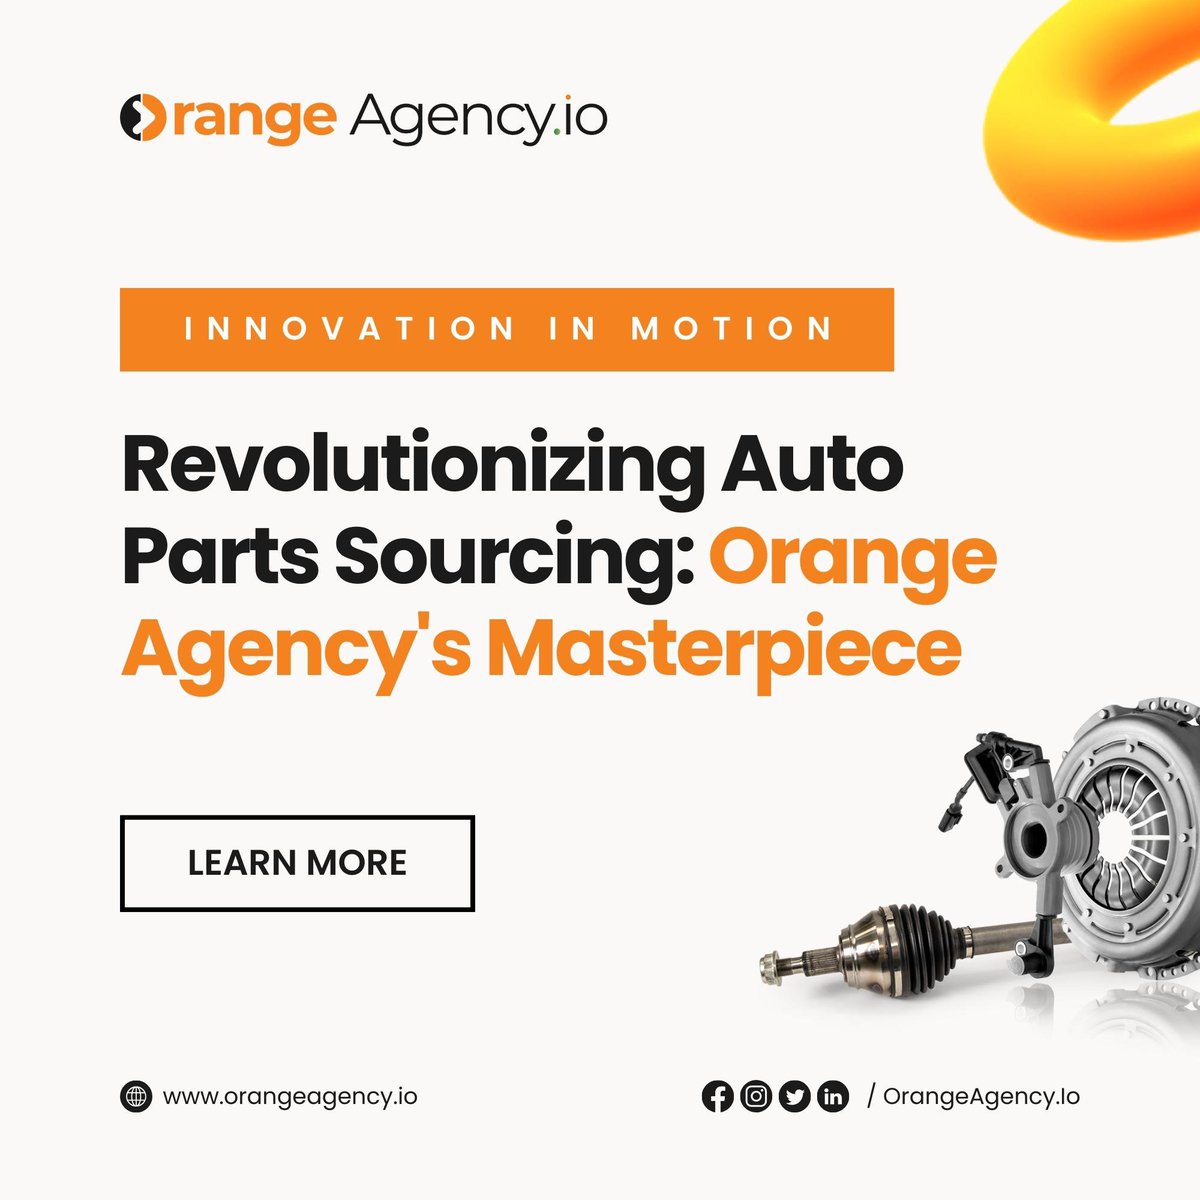 Revolutionizing Auto Parts Sourcing: Orange Agency's Masterpiece

Innovation In Motion! tinyurl.com/2ckv4f4j

#OrangeAgency #InnovationInMotion #AutoDesign #EngineeringExcellence #DrivingInStyle #FutureOfDriving #OnlineEngagement #Niger #ElonMusk #Titanic #TheEqualizer3